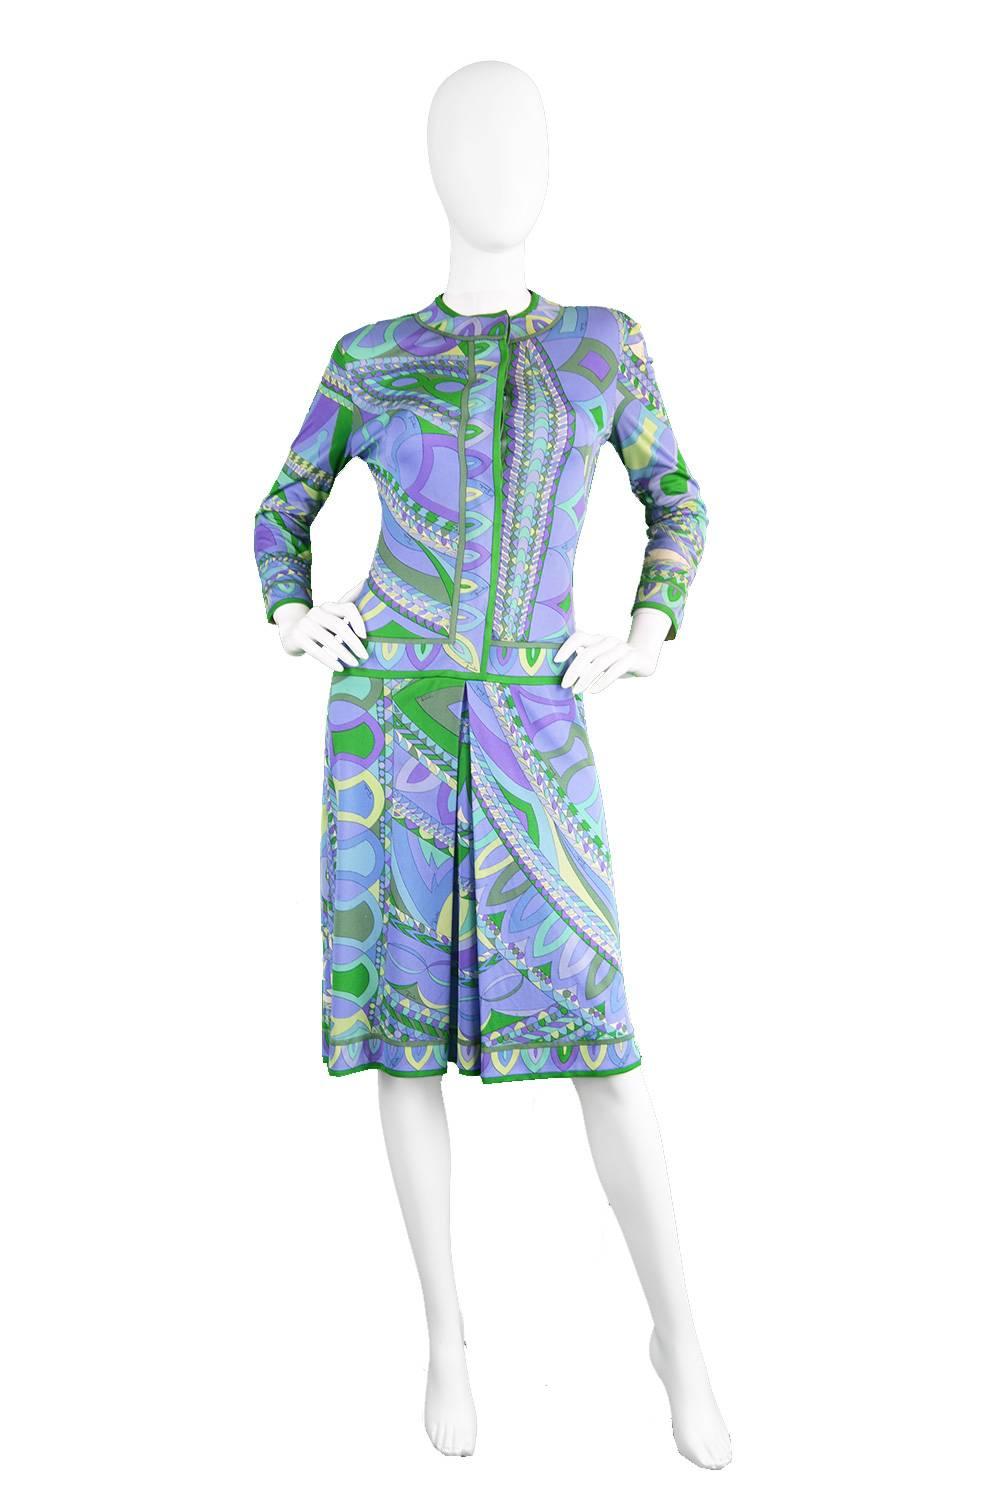 An incredible vintage Emilio Pucci shift dress from the 1960s in his trademark silk jersey, which gives incredible drape and fluidity and is signed with 'Emilio' throughout. In hues of purple, green and blue, this print is bold yet refined creating